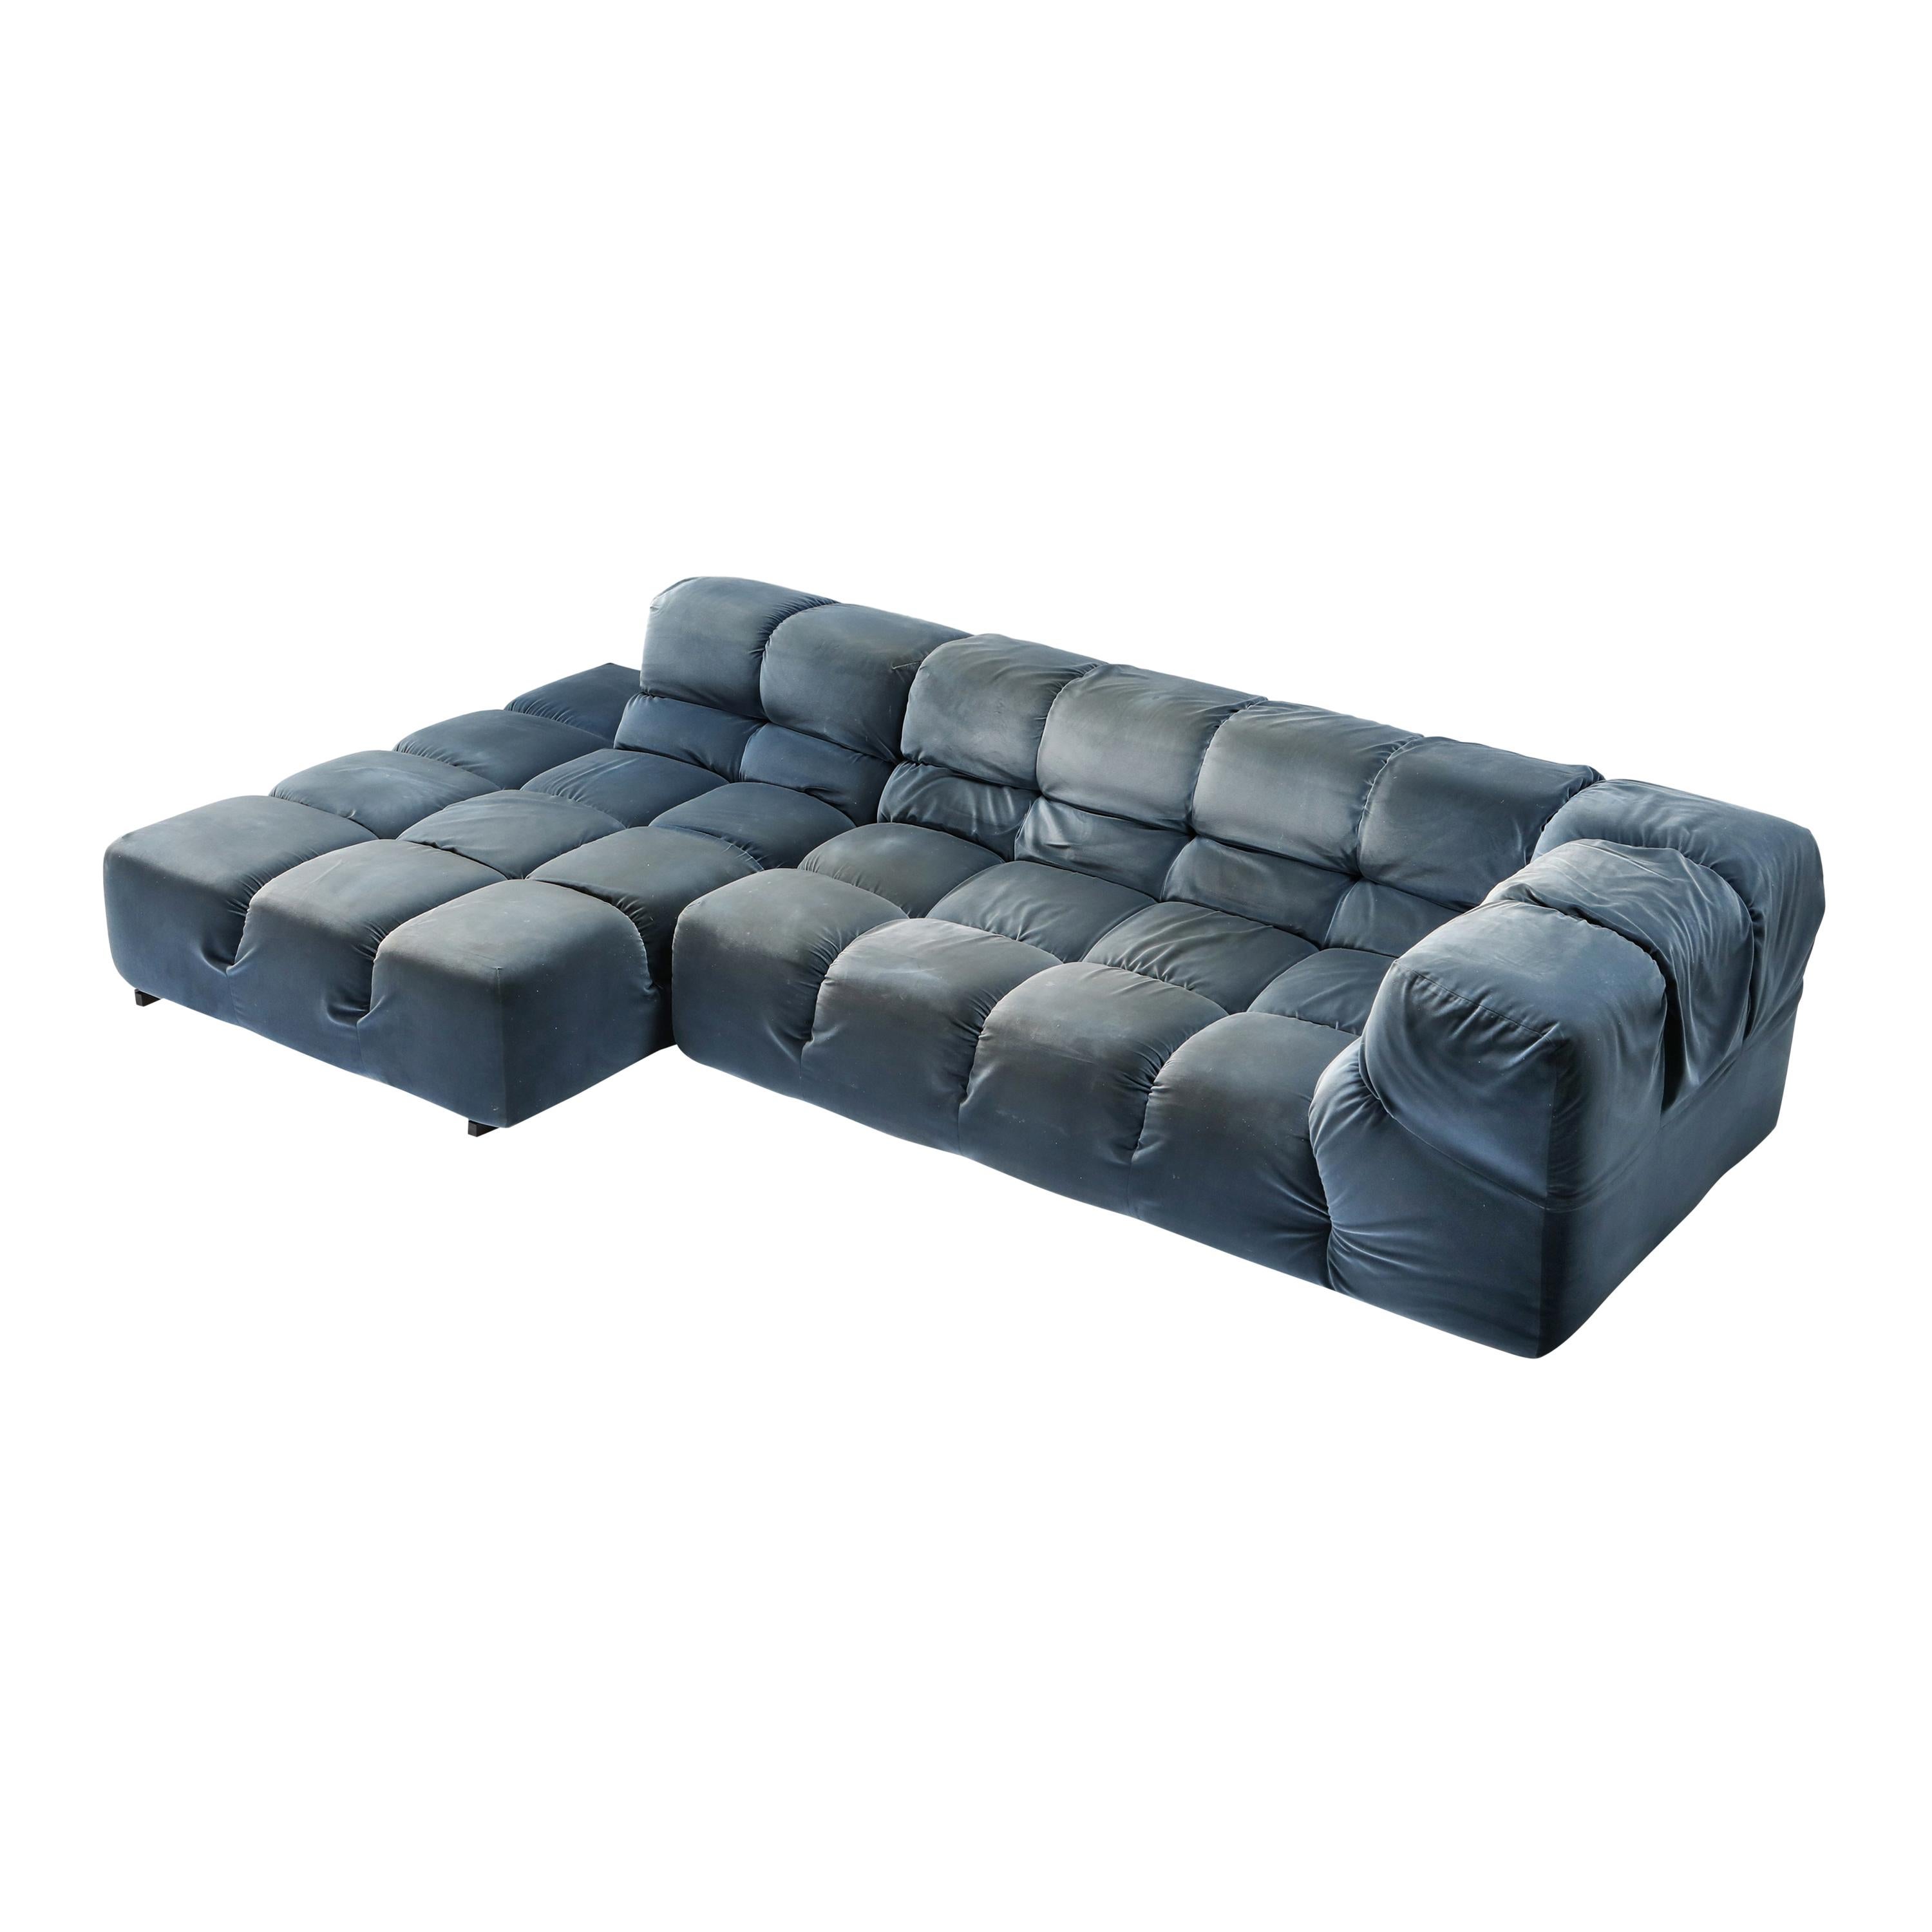 Tufty-Time Sectional Couch by Patricia Urquiola